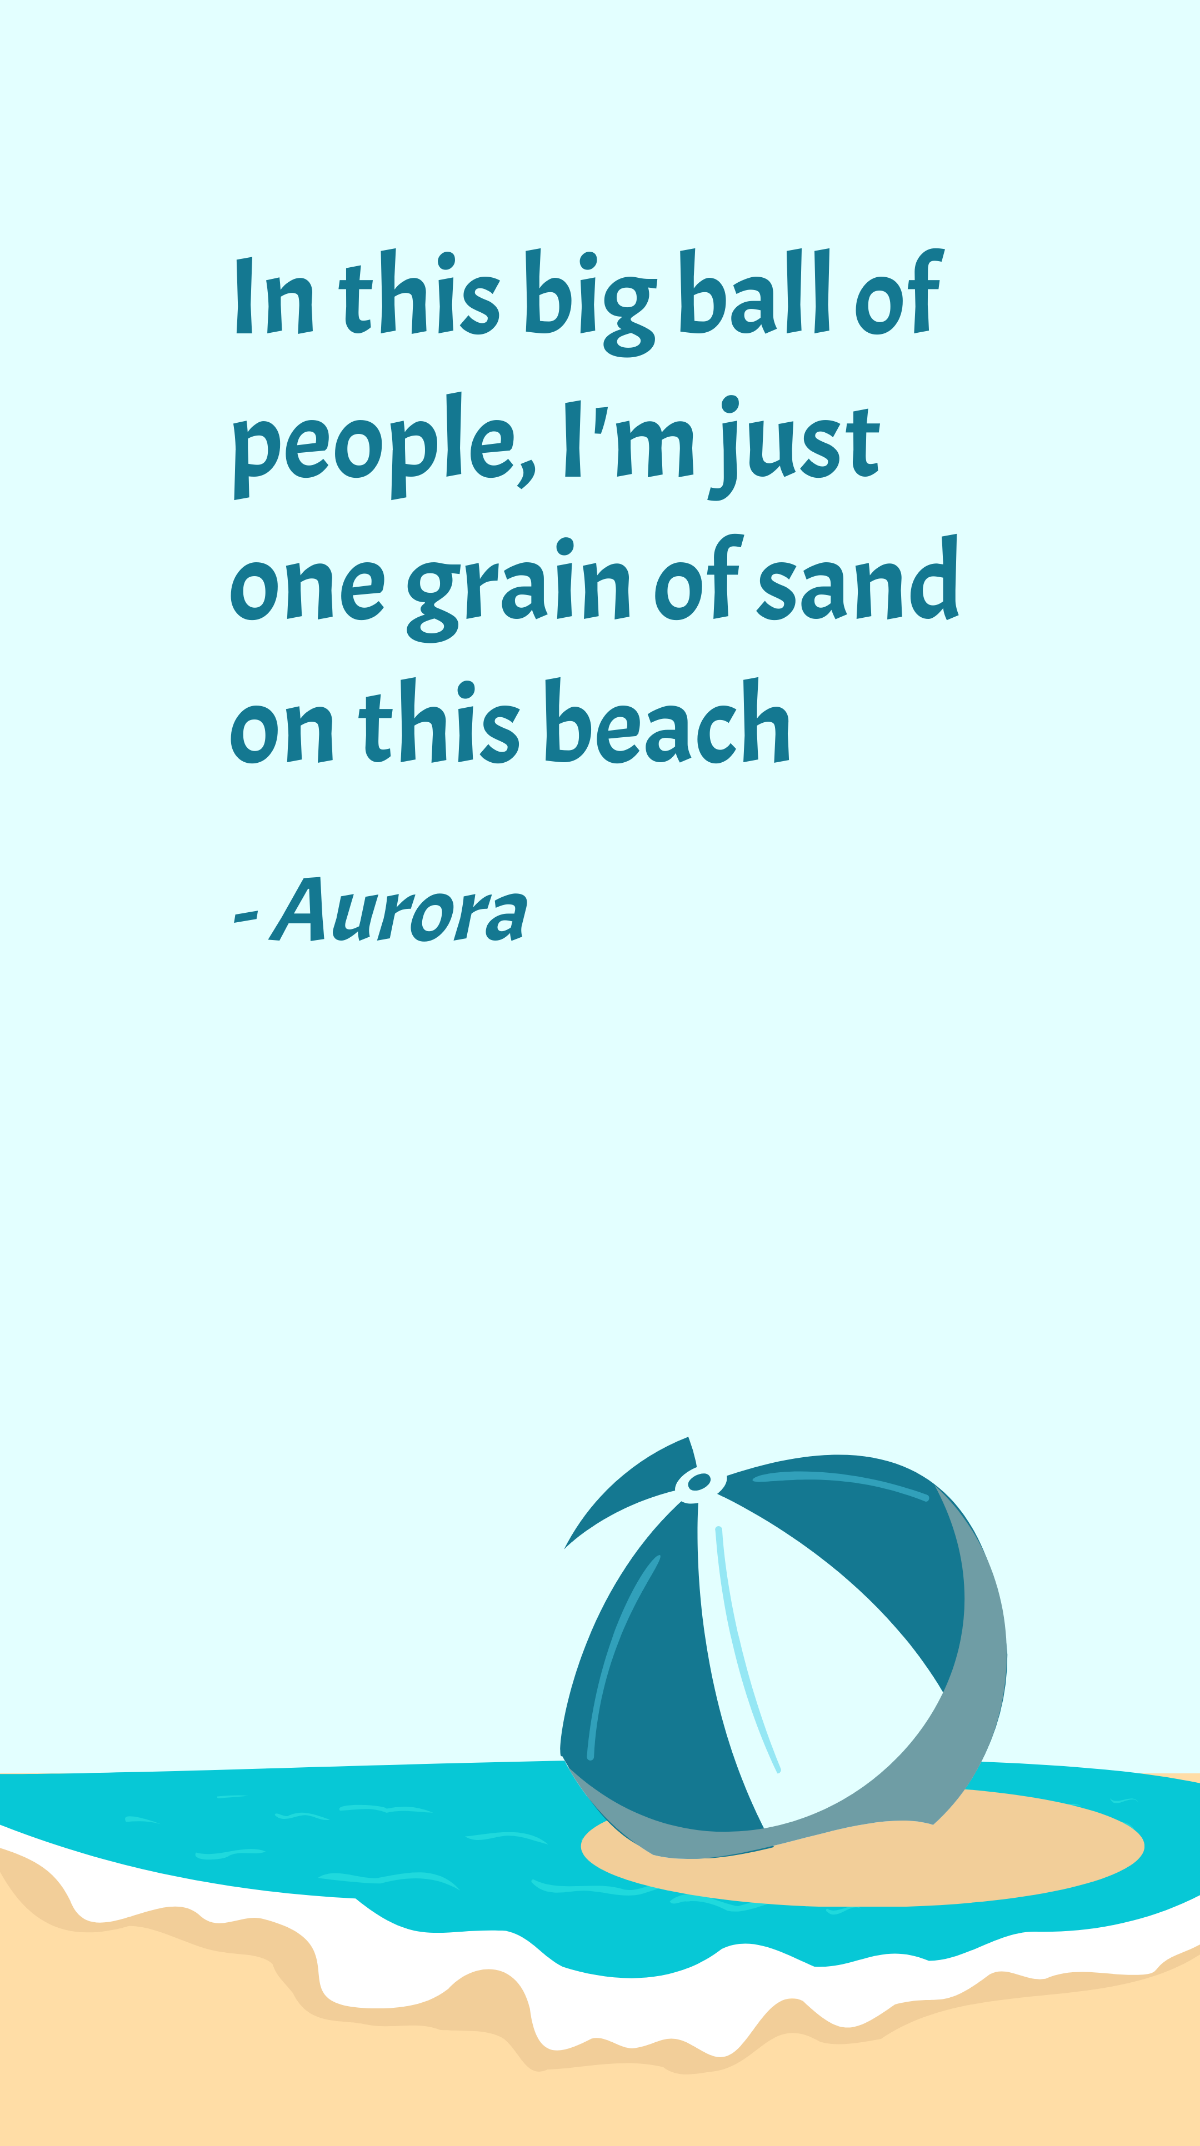 Free Aurora - In this big ball of people, I'm just one grain of sand on this beach Template